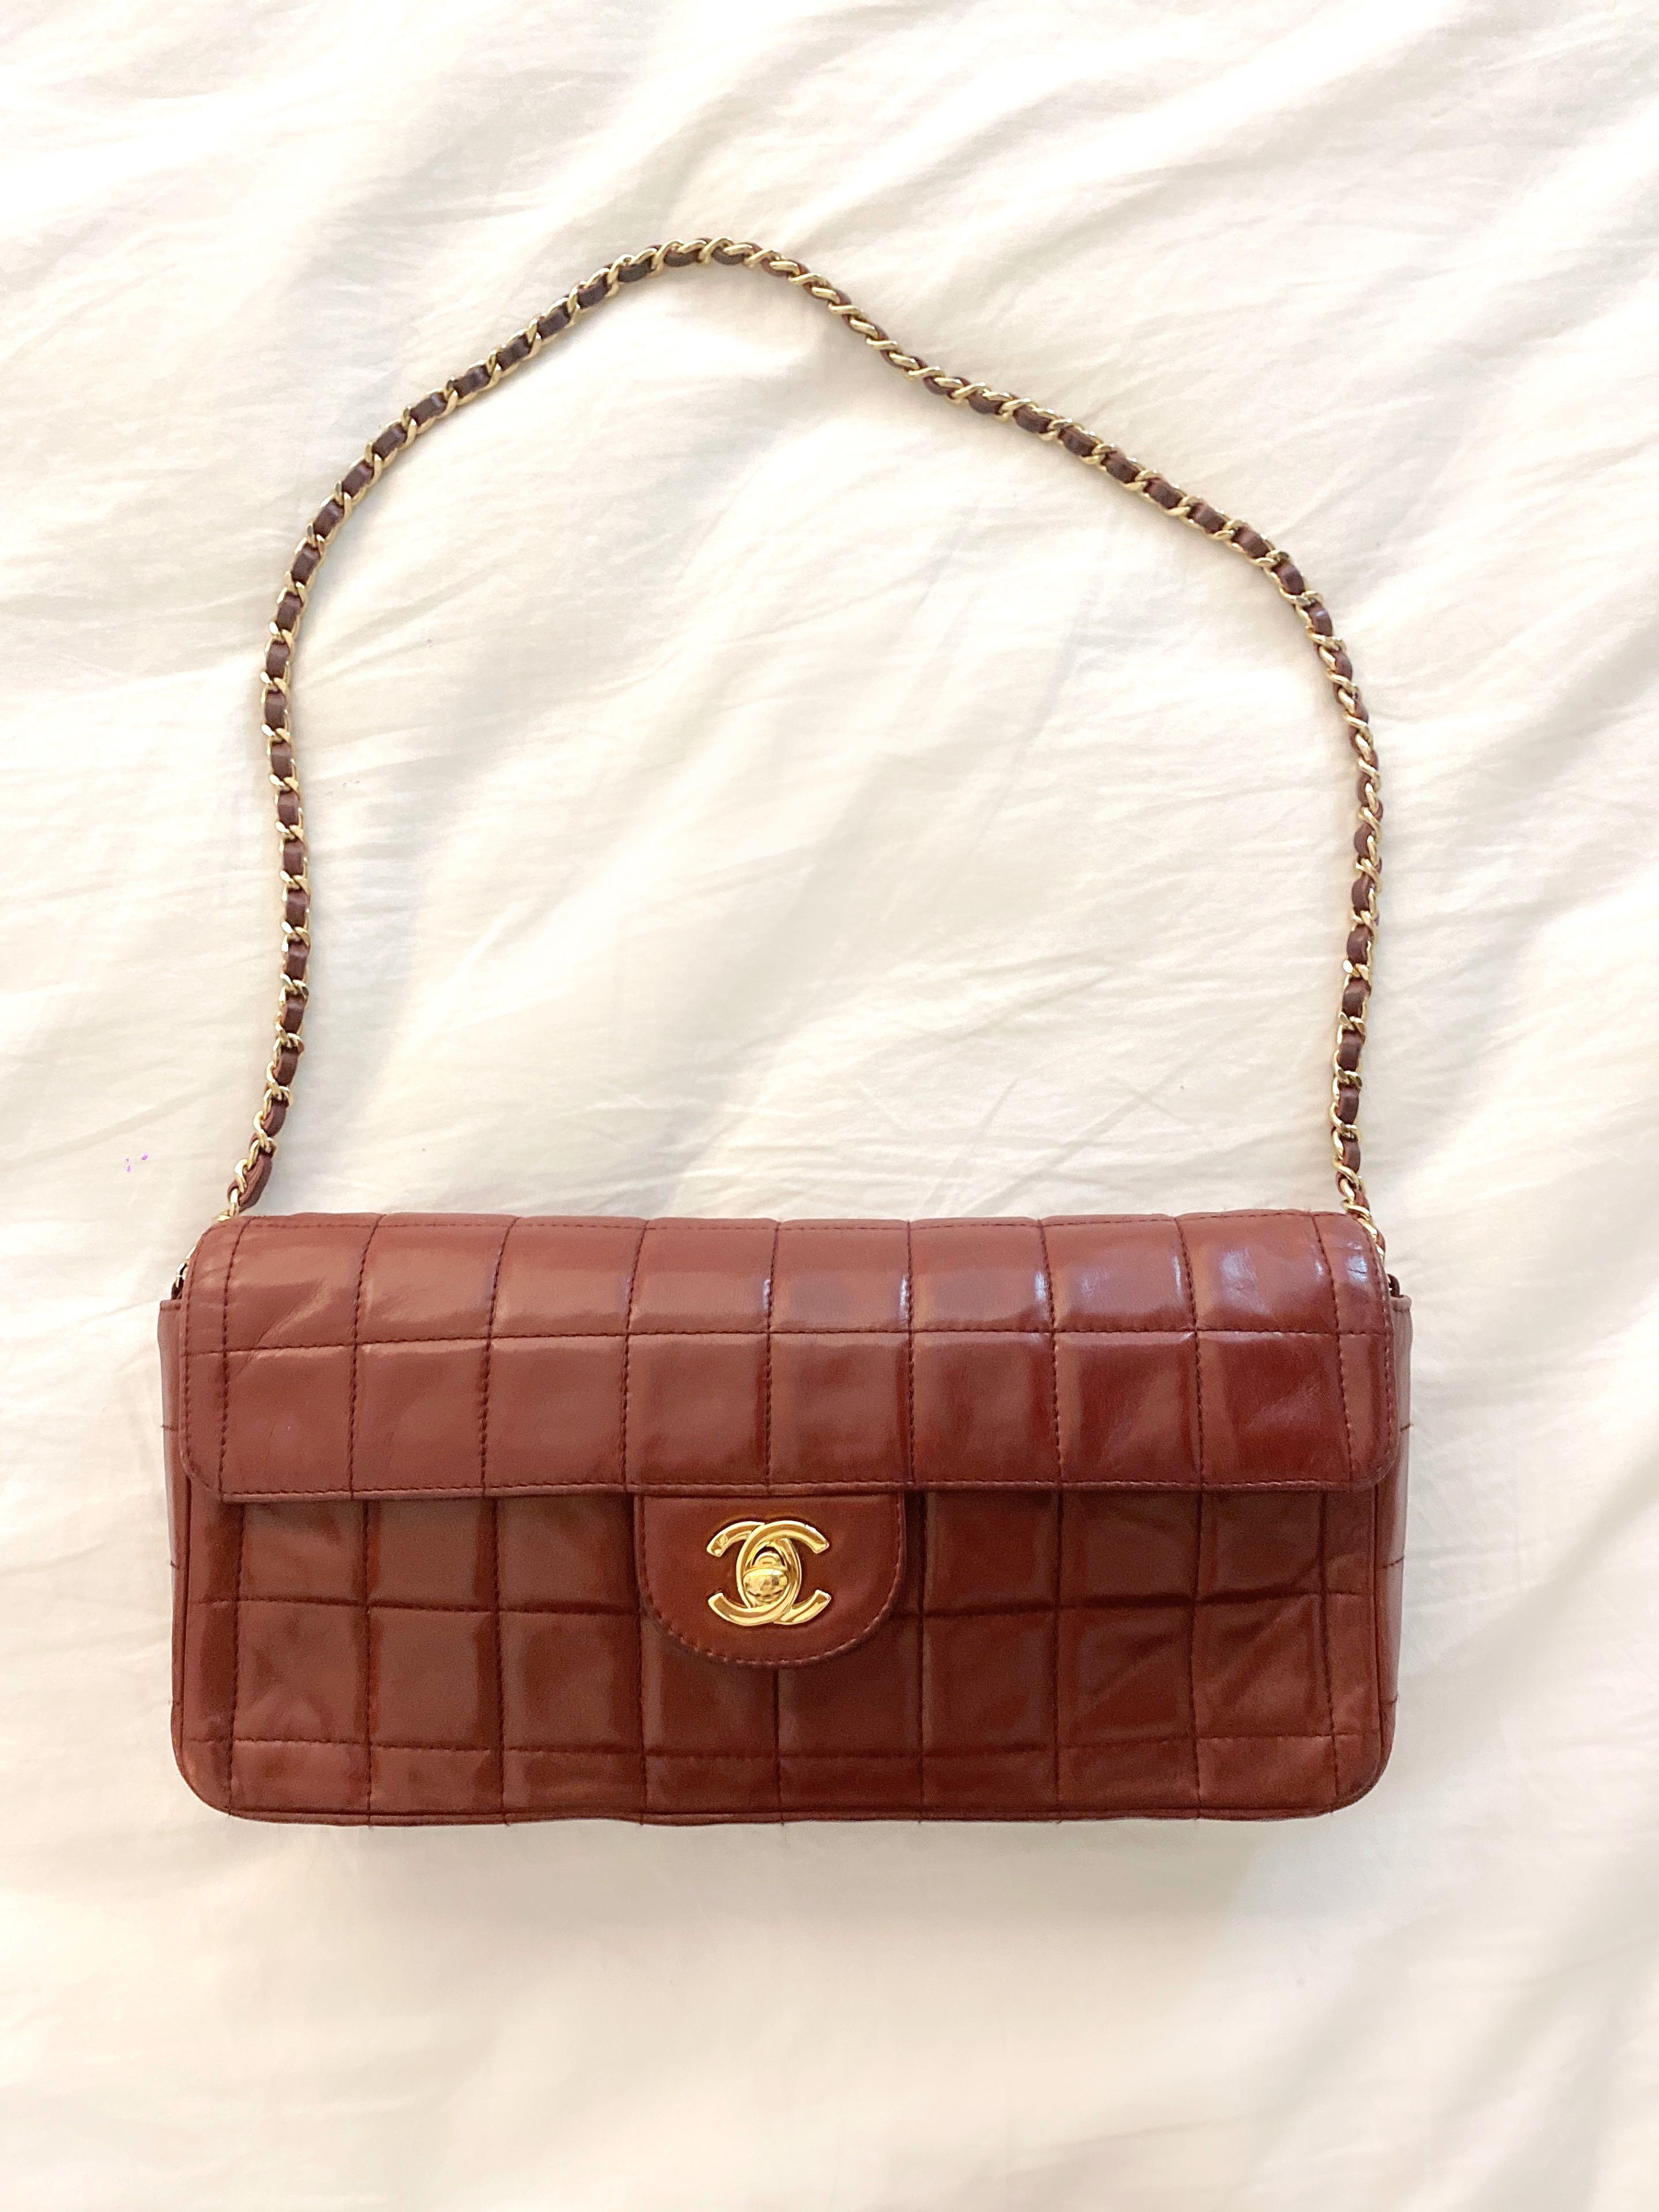 Chanel East West Chocolate Bar Quilted Lambskin Leather Shoulder Bag